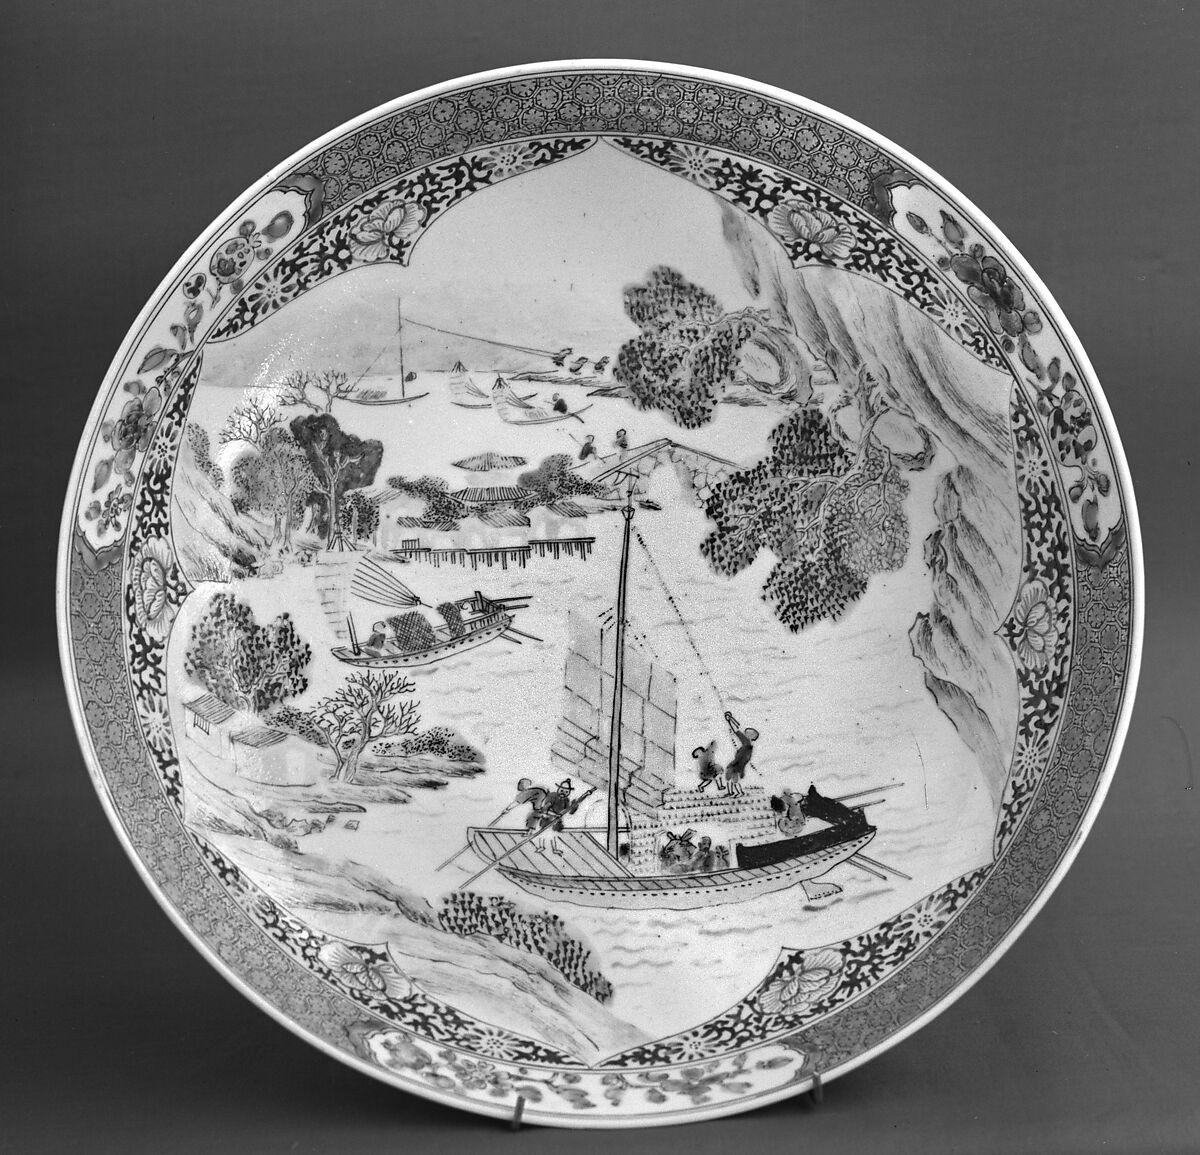 Dish with sailing-boat, Porcelain painted in overglaze polychrome enamels (Jingdezhen ware), China 